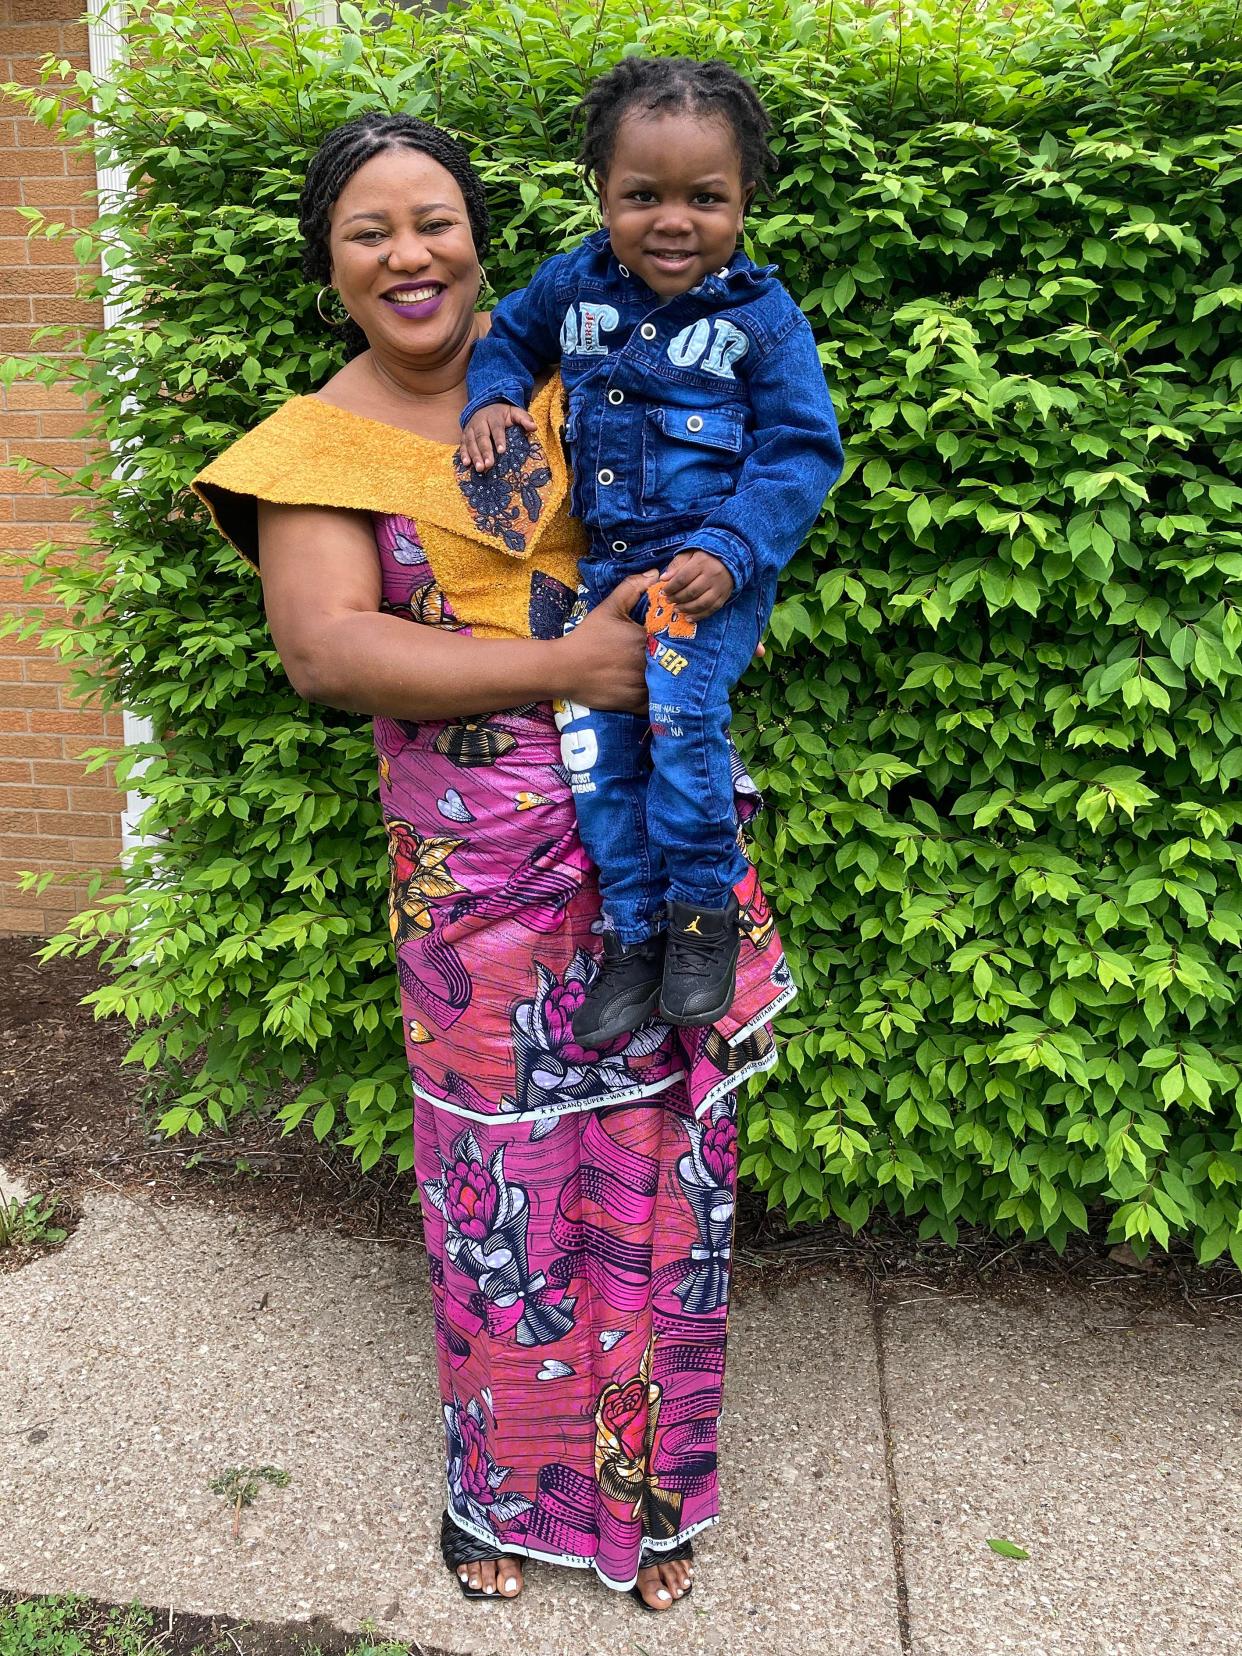 Hortense Kassale, 41, of Erie, is a mother of five boys. Adwin Nsola, 2, is her youngest. Kassale is originally rom the Democratic Republic of Congo and moved to Erie in 2014.